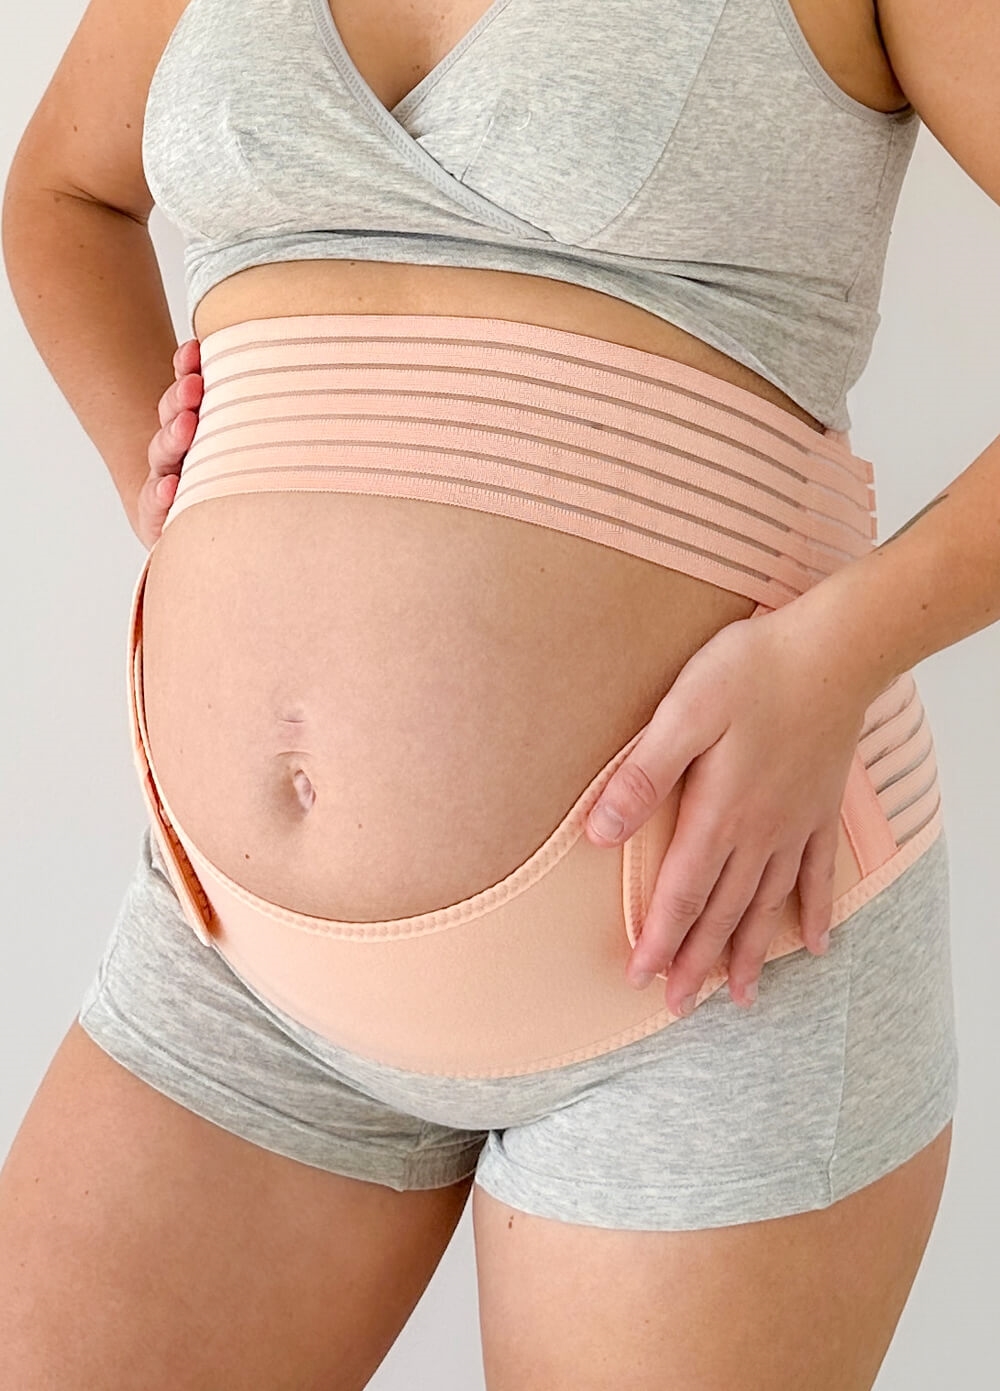 Emma Jane maternity support belts and underwear